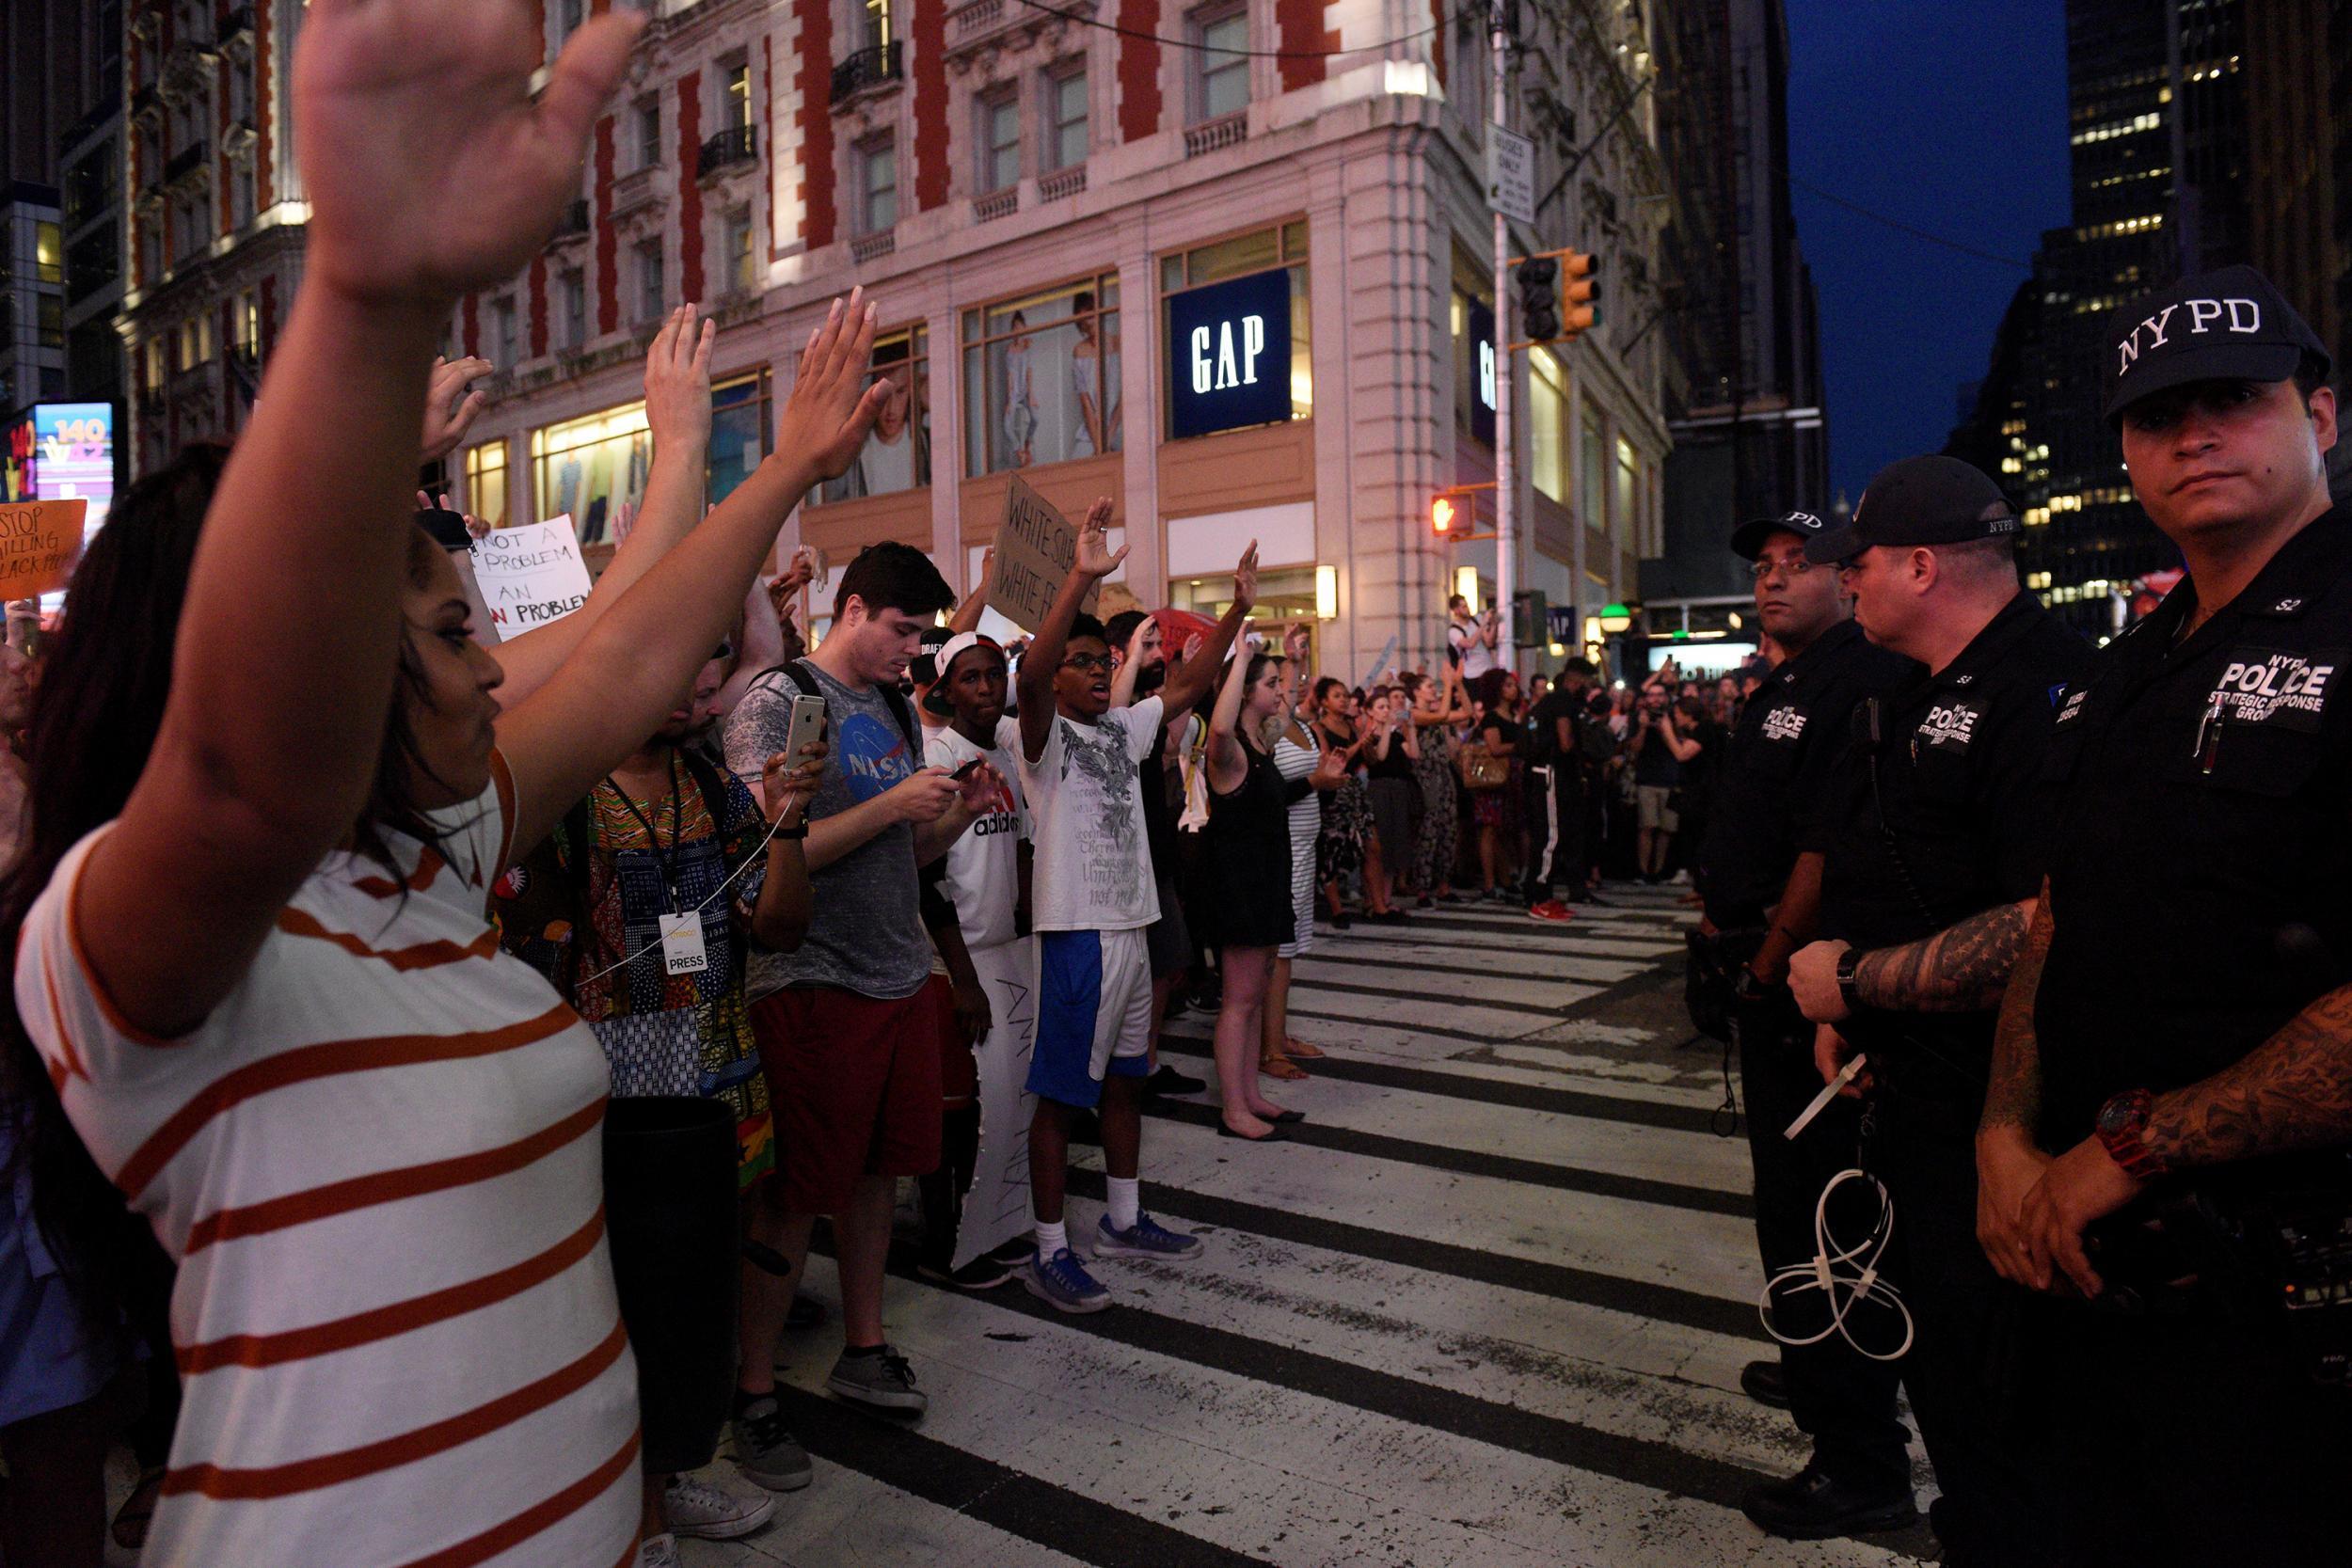 Protesters raise their arms in front of armed US police